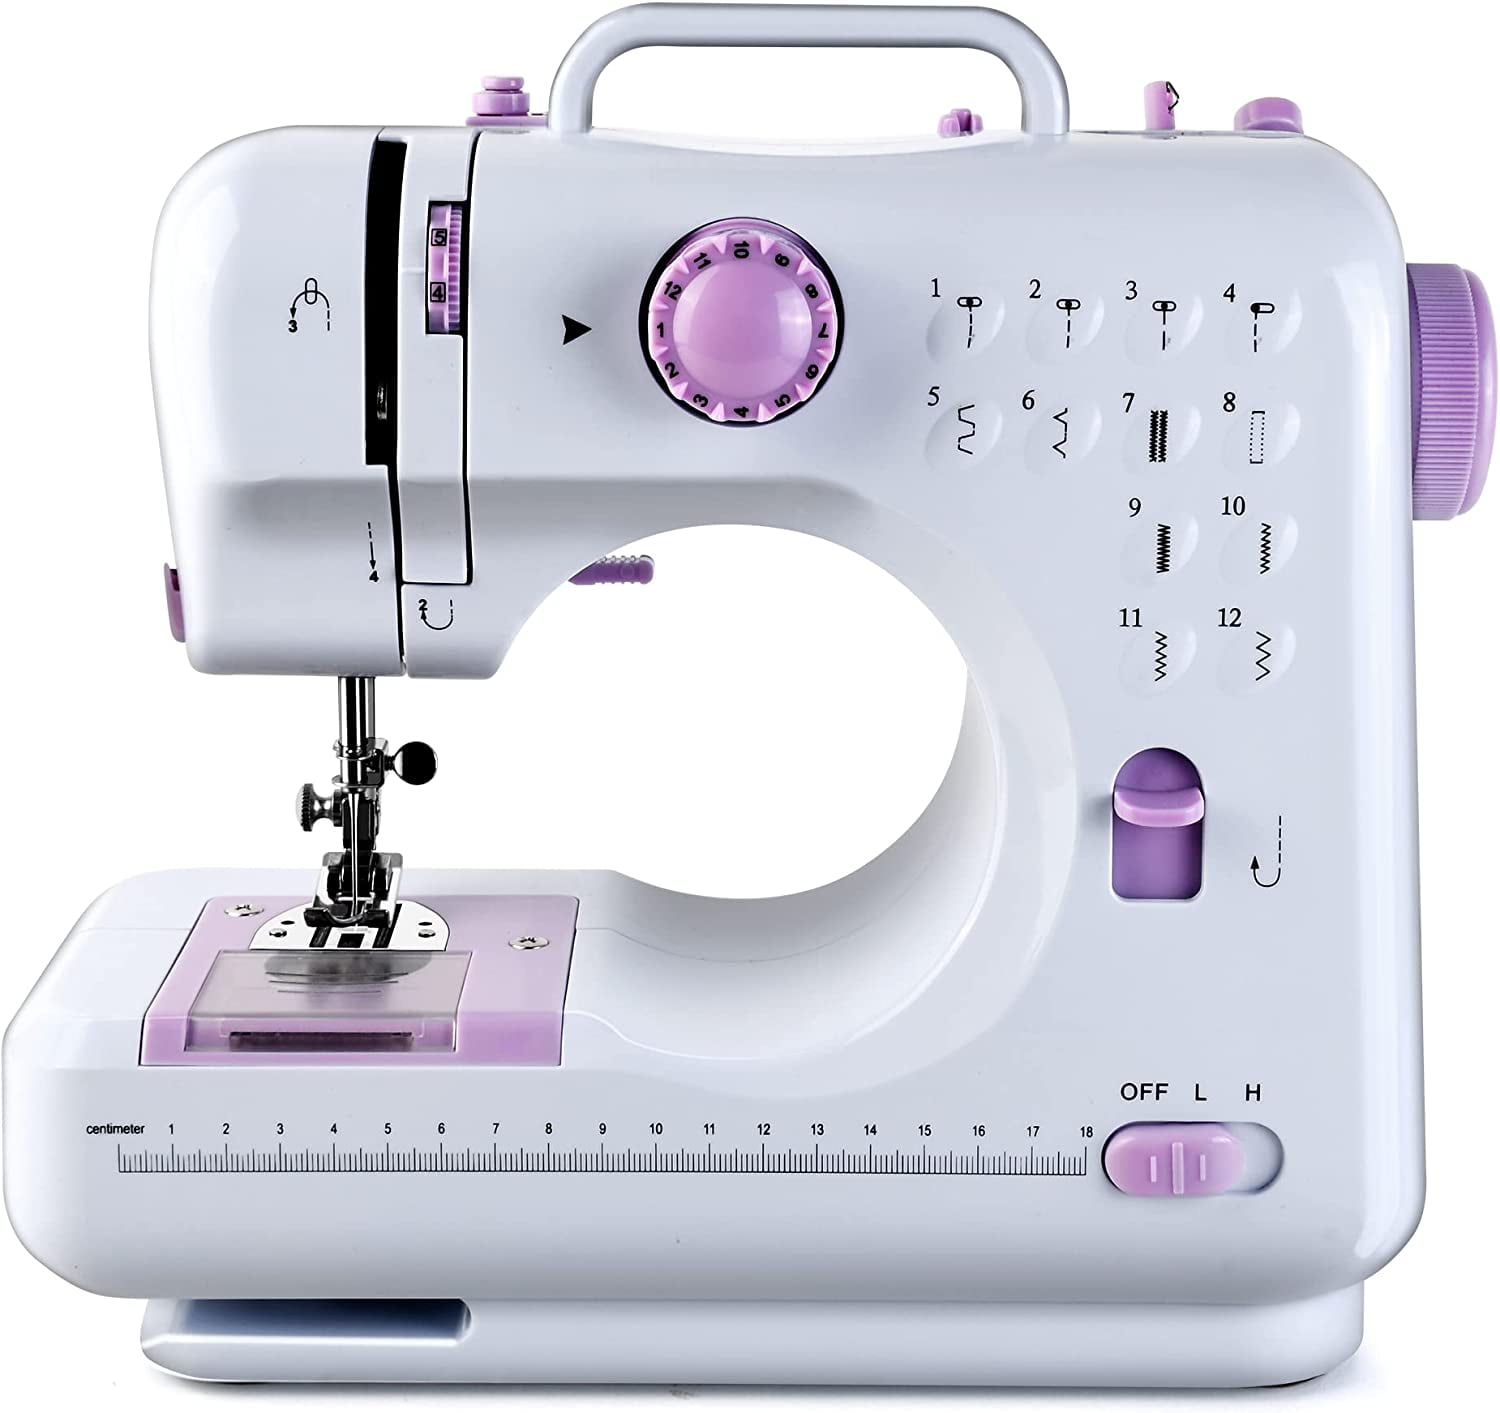 Mini Sewing Machine with 42 Pcs Sewing Kit, Foot Pedal and Adapter, Purple